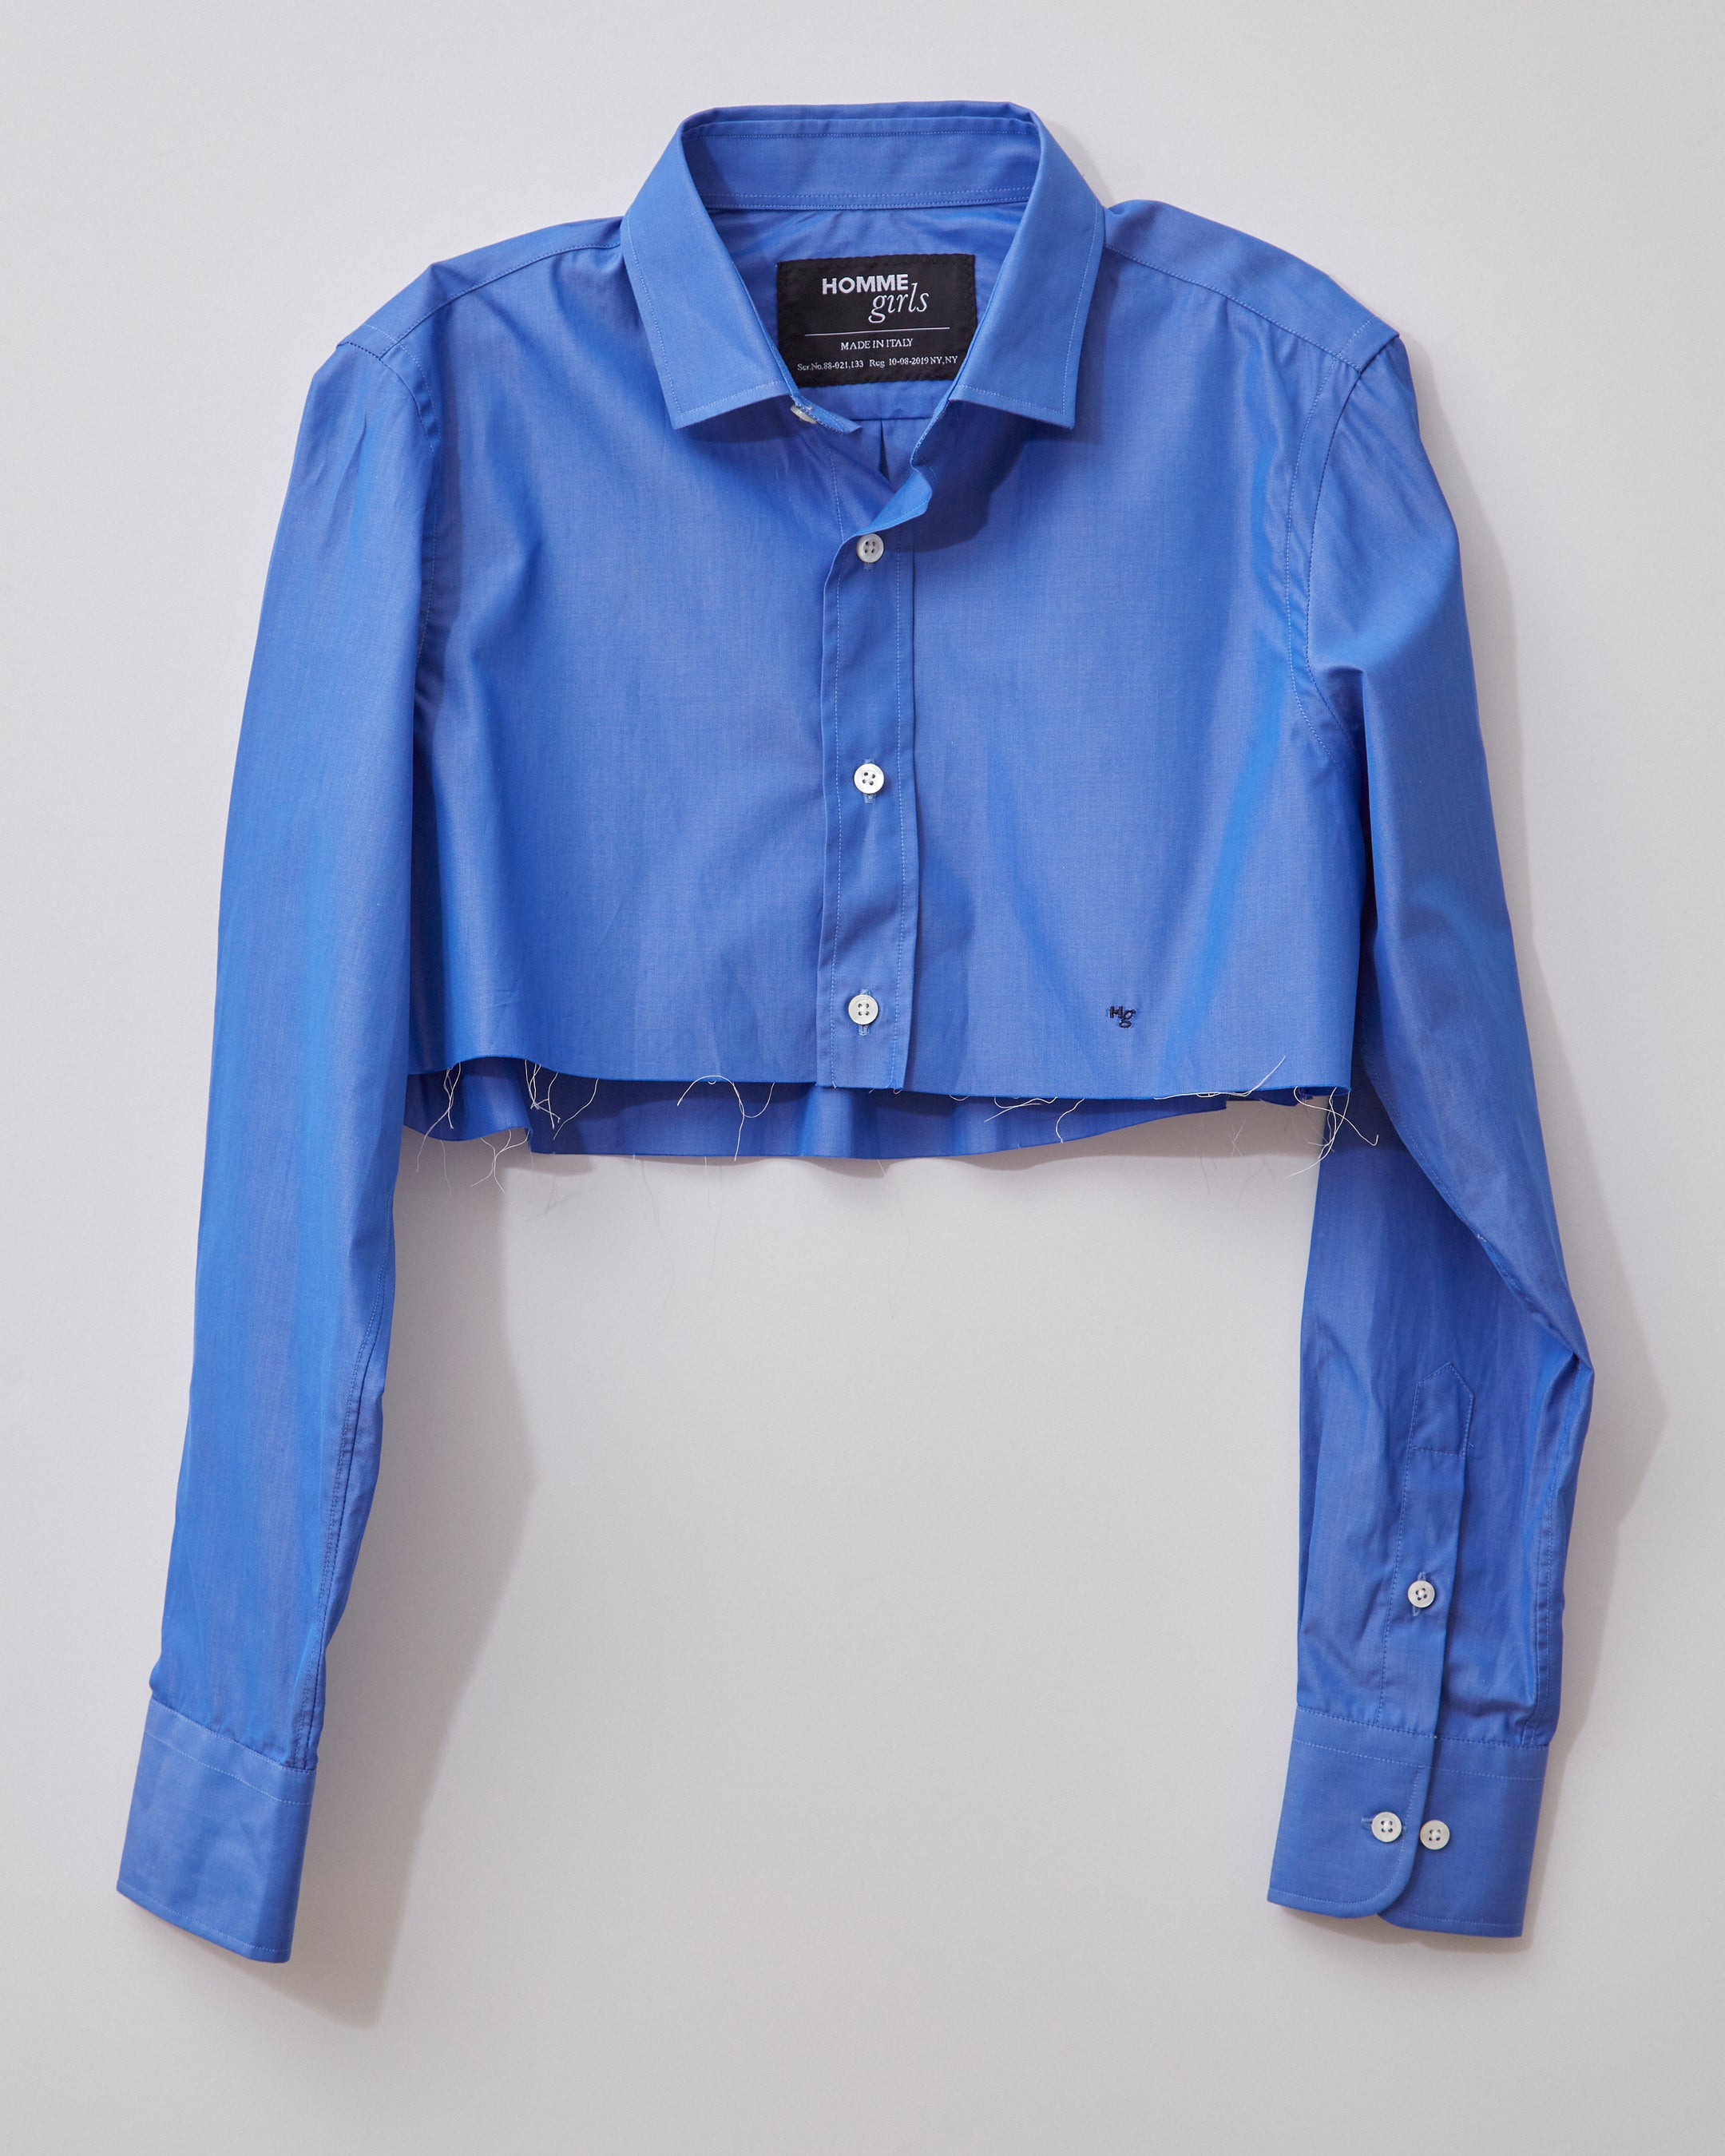 Super Cropped Shirt in Blue